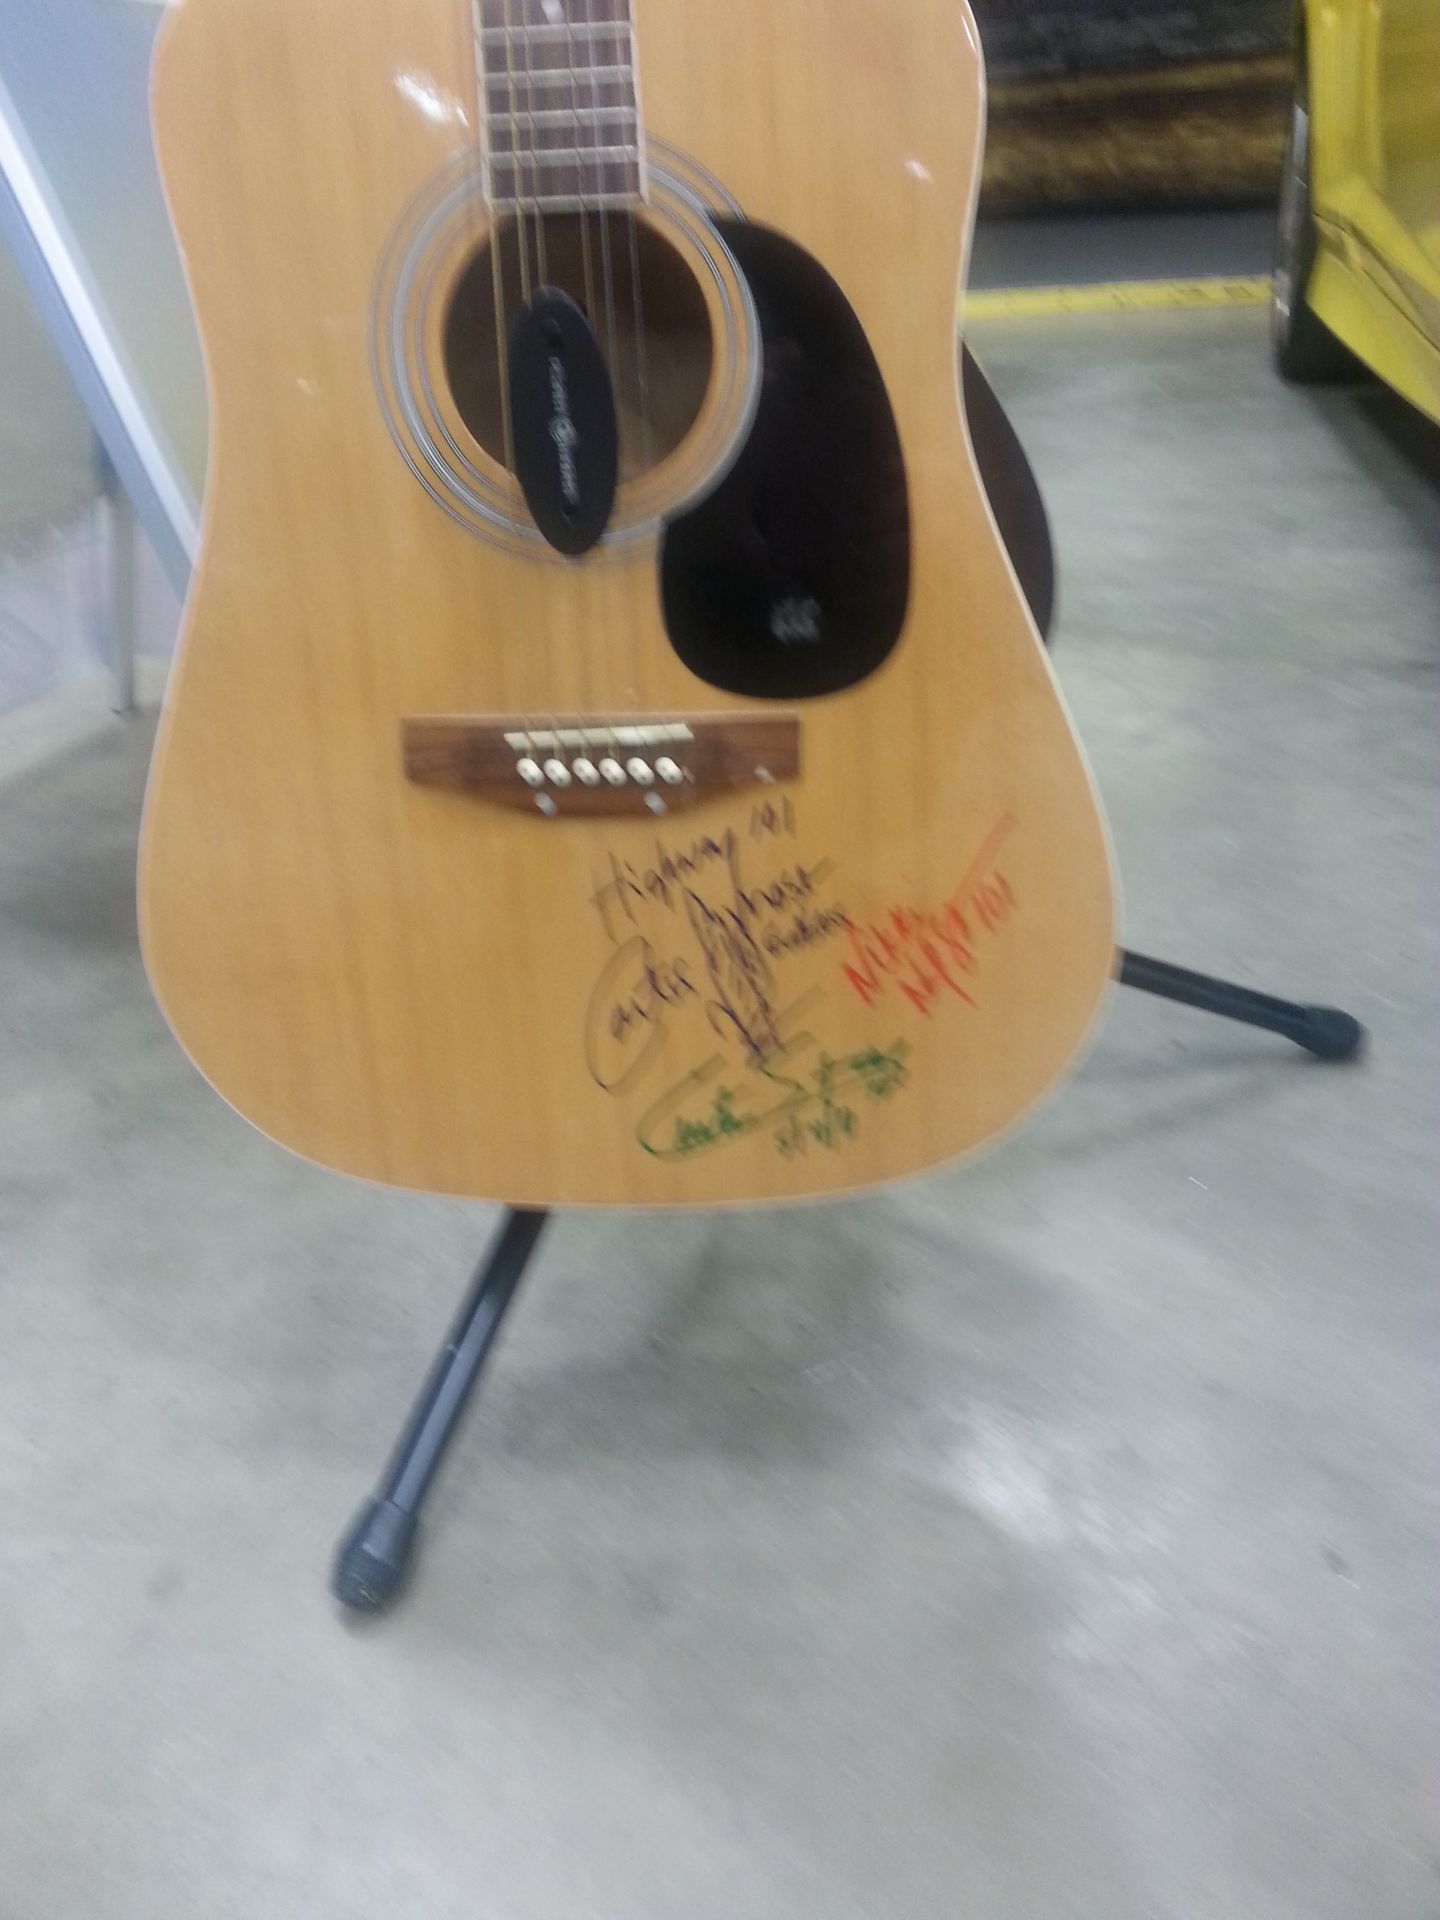 signed guitar and picture by Highway 101